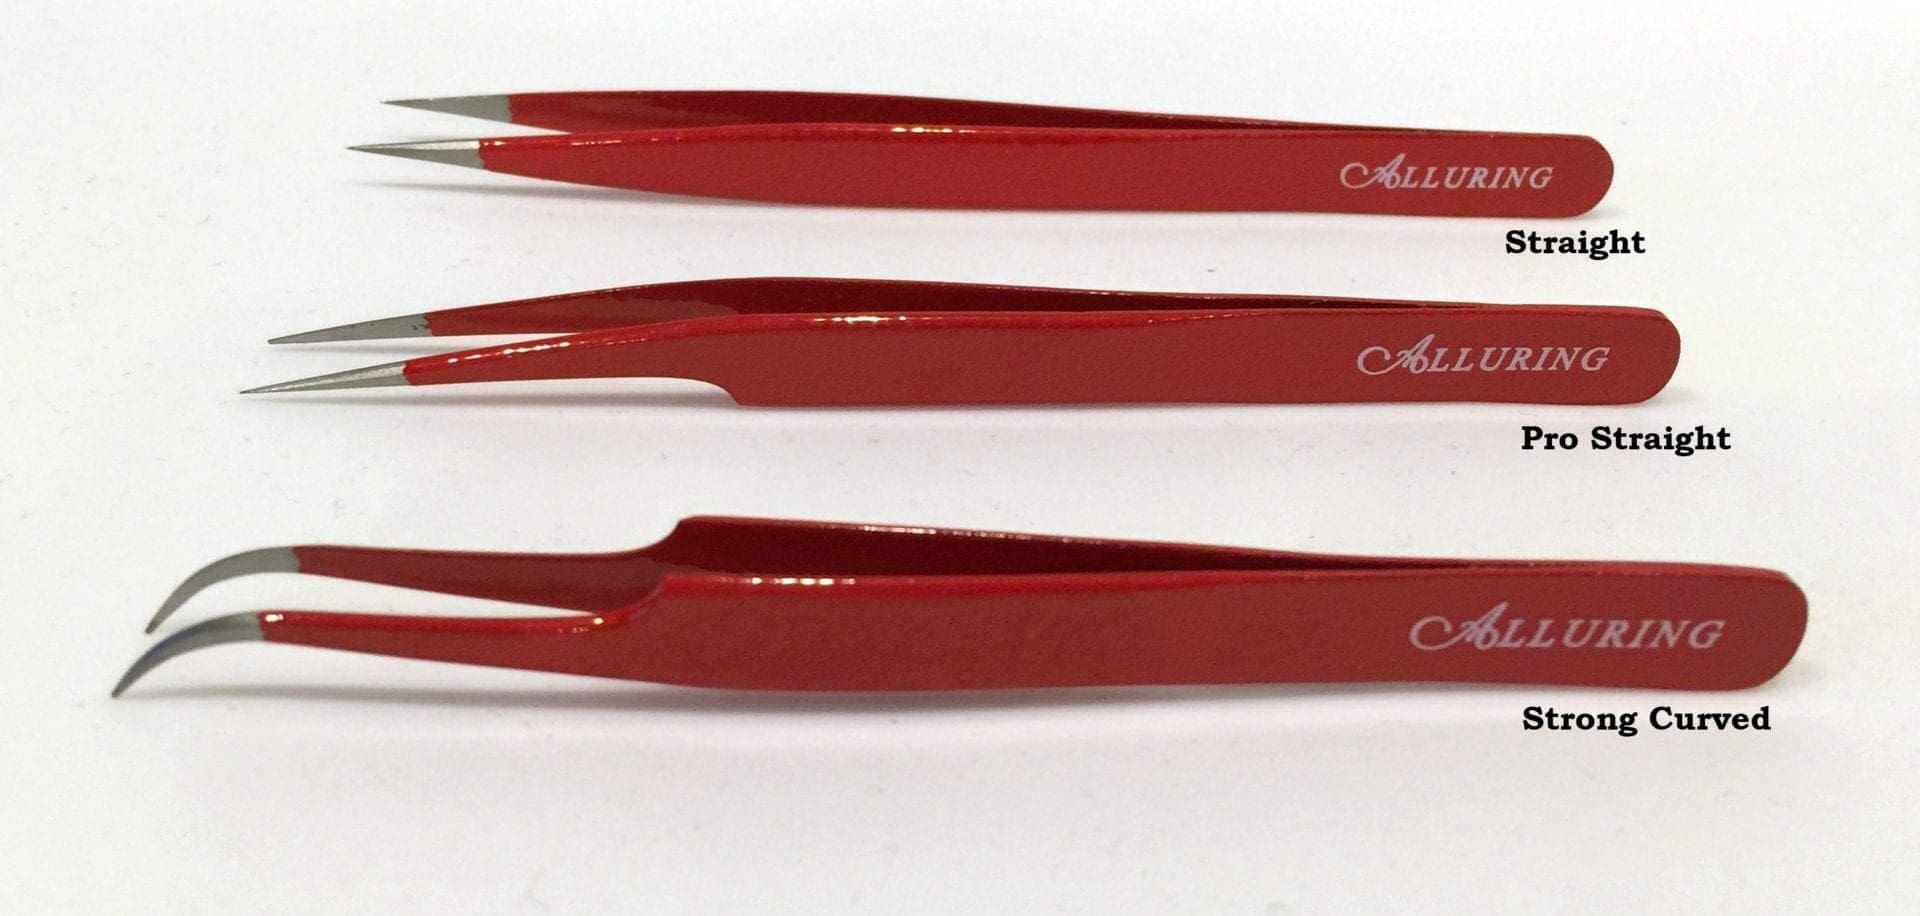 A set of three red tweezers on top of a white surface.